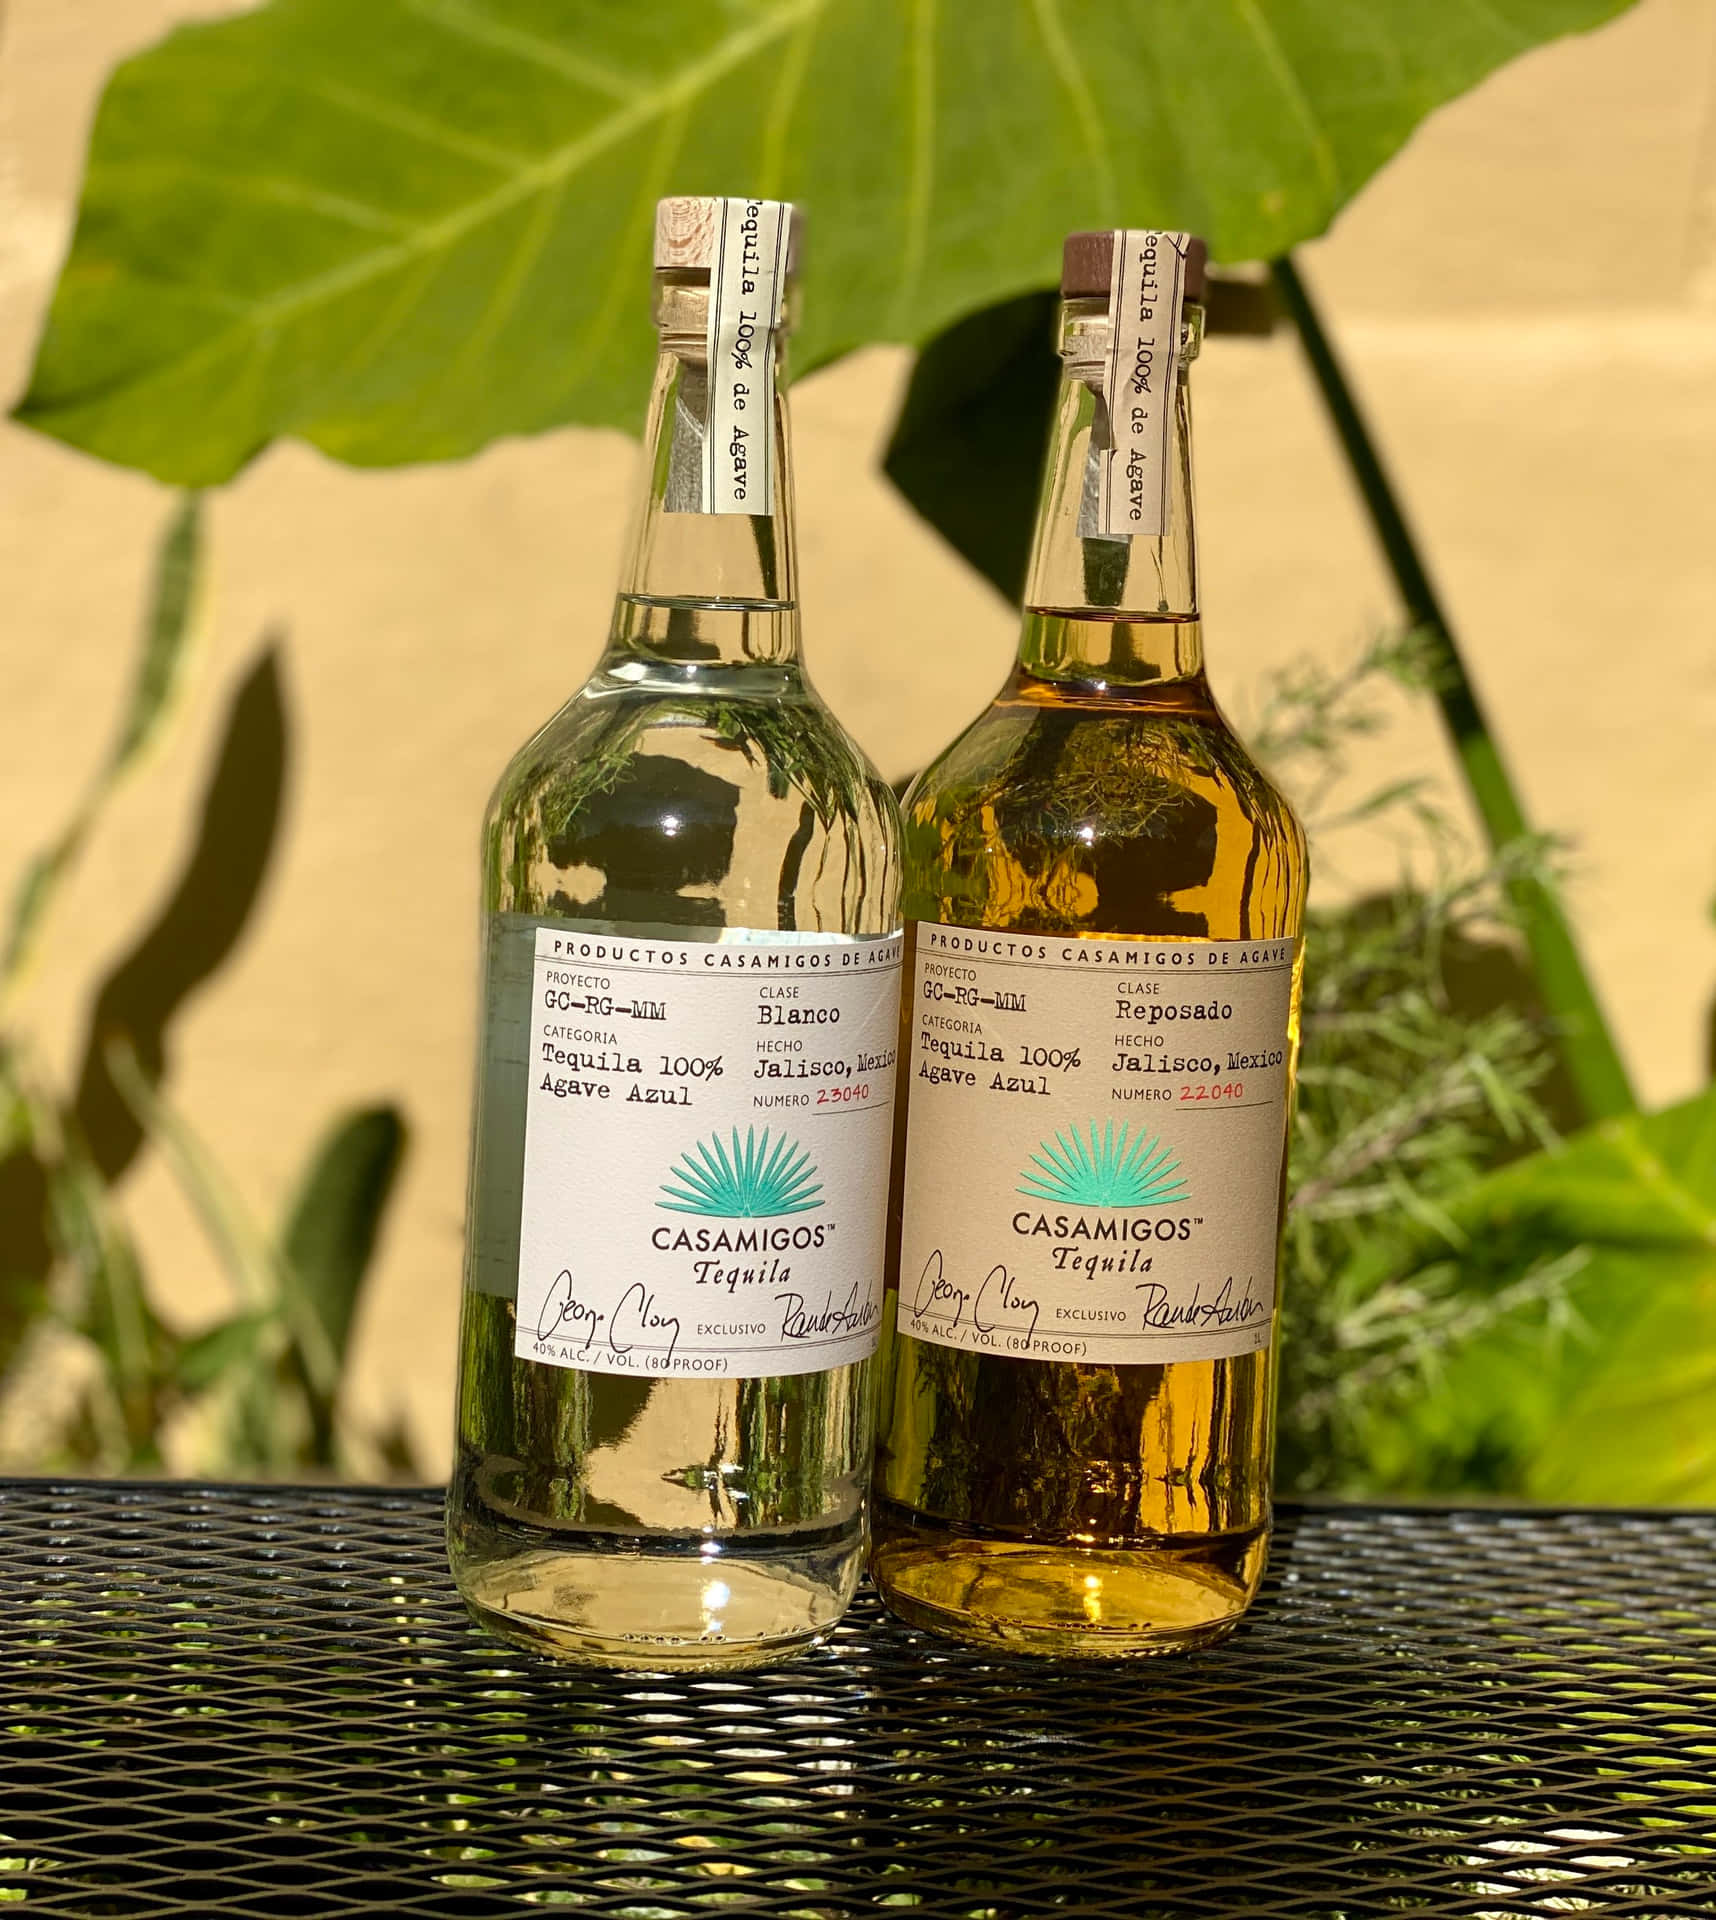 Casamigos Tequila Blanco And Reposado Liquor Bottles On Mesh Table Picture